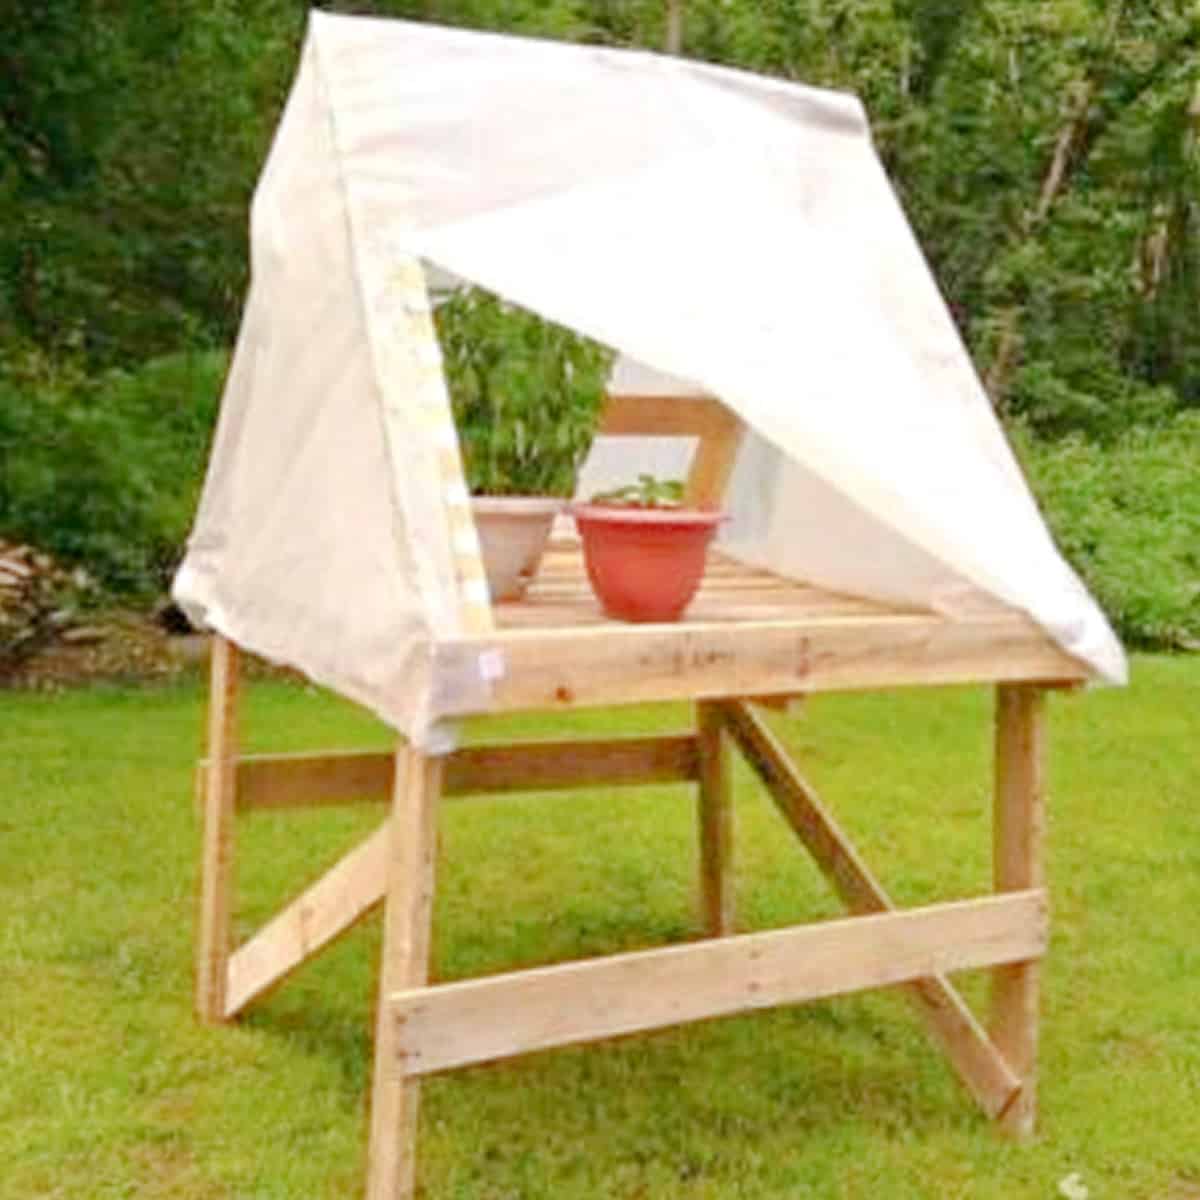 Make A Mini Pallet Greenhouse for $5 !